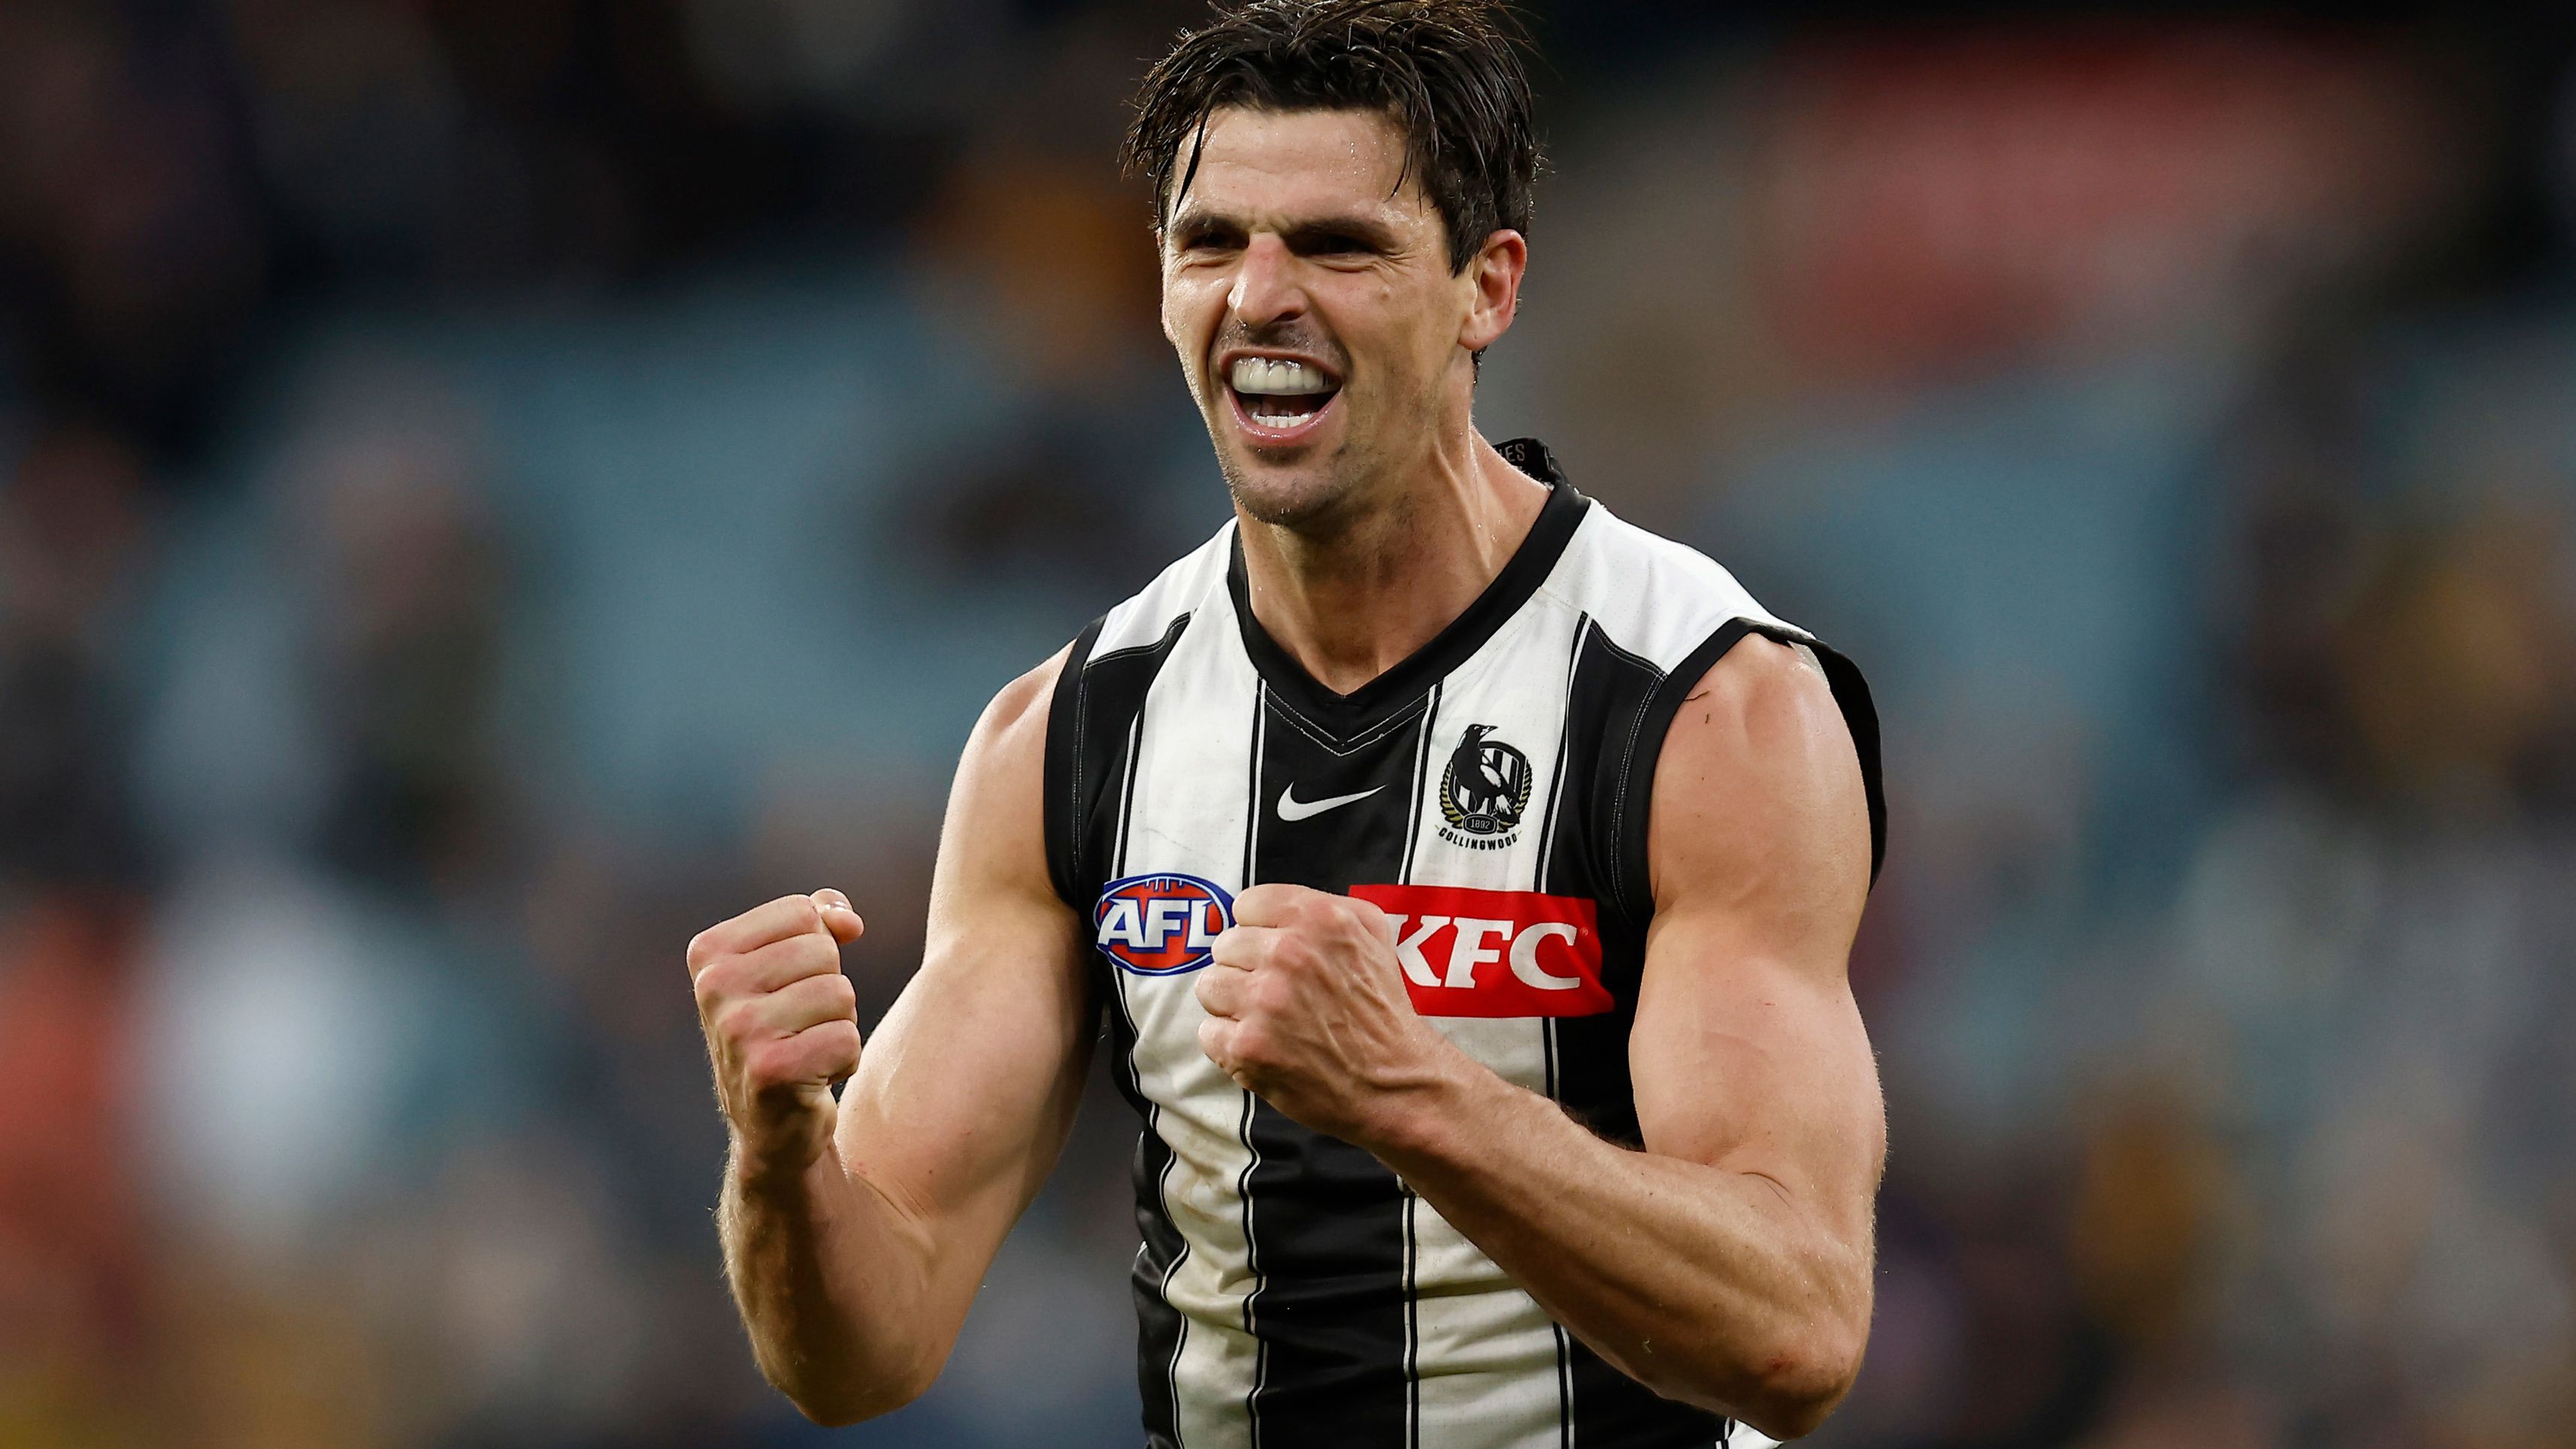 Scott Pendlebury of the Magpies  celebrates on the  final sirern during the round 12 AFL match between the Hawthorn Hawks and the Collingwood Magpies at Melbourne Cricket Ground on June 05, 2022 in Melbourne, Australia. (Photo by Darrian Traynor/Getty Images)